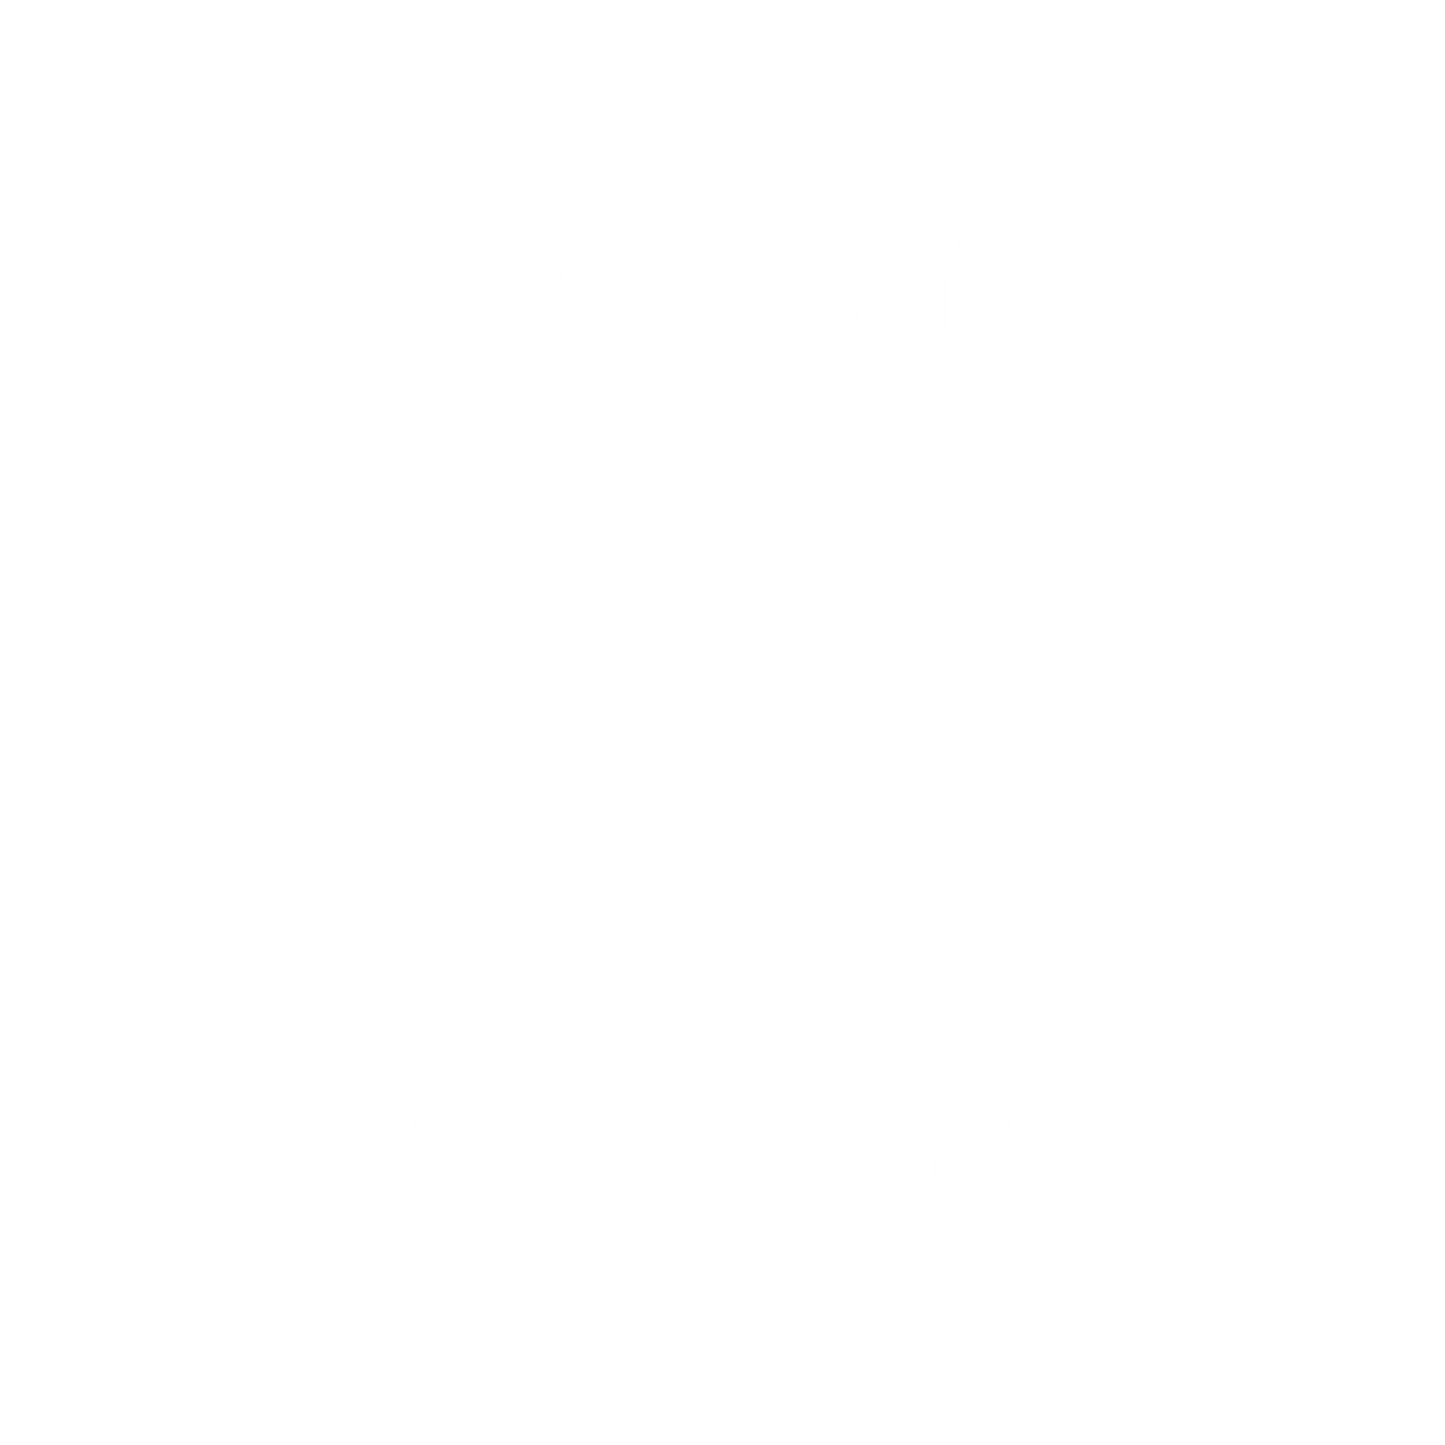 I Didn't Ask You To dance, I Said You Look Fat In Those Pants.